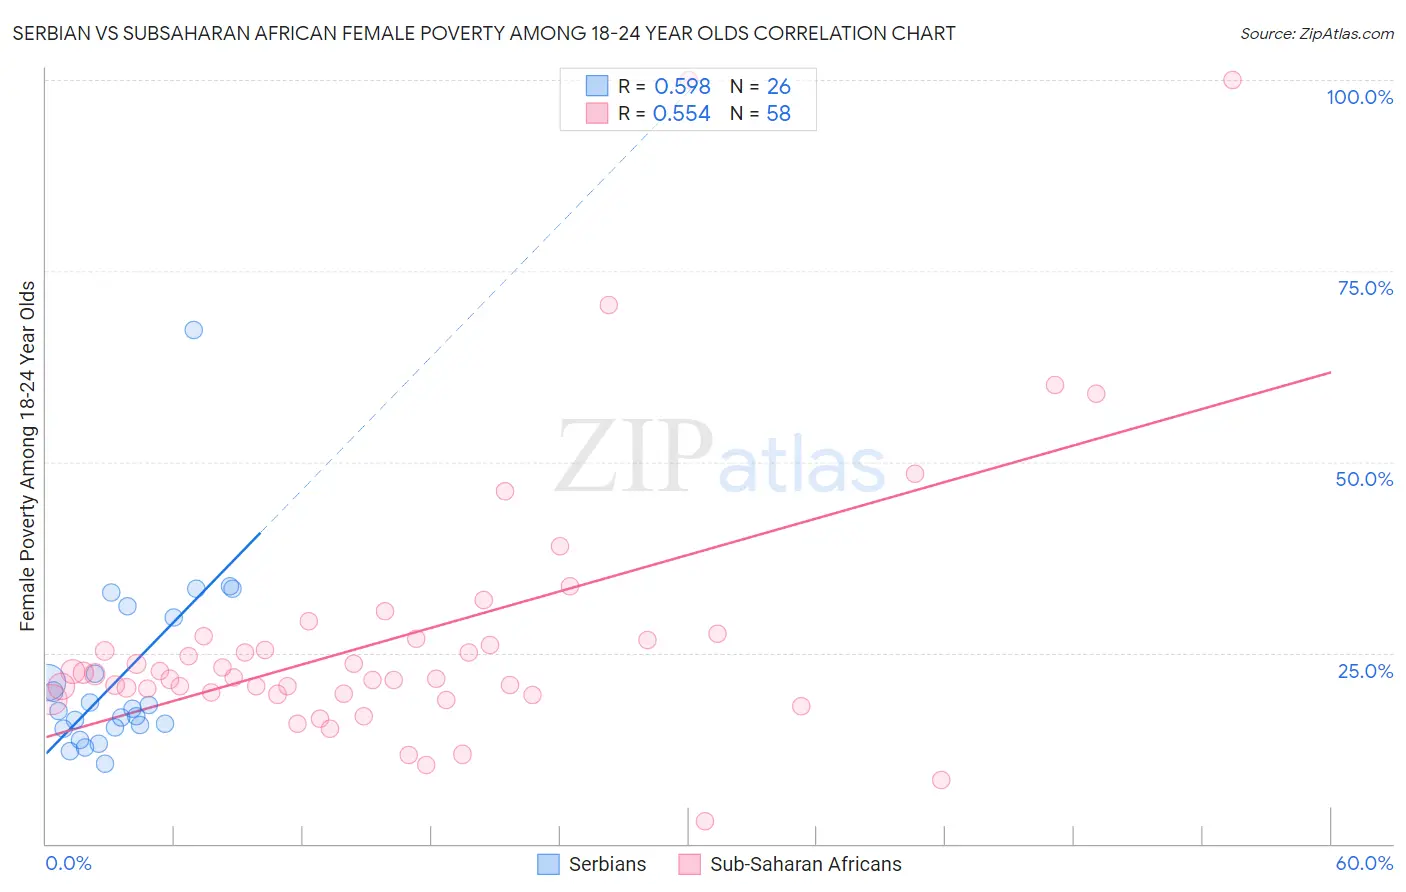 Serbian vs Subsaharan African Female Poverty Among 18-24 Year Olds